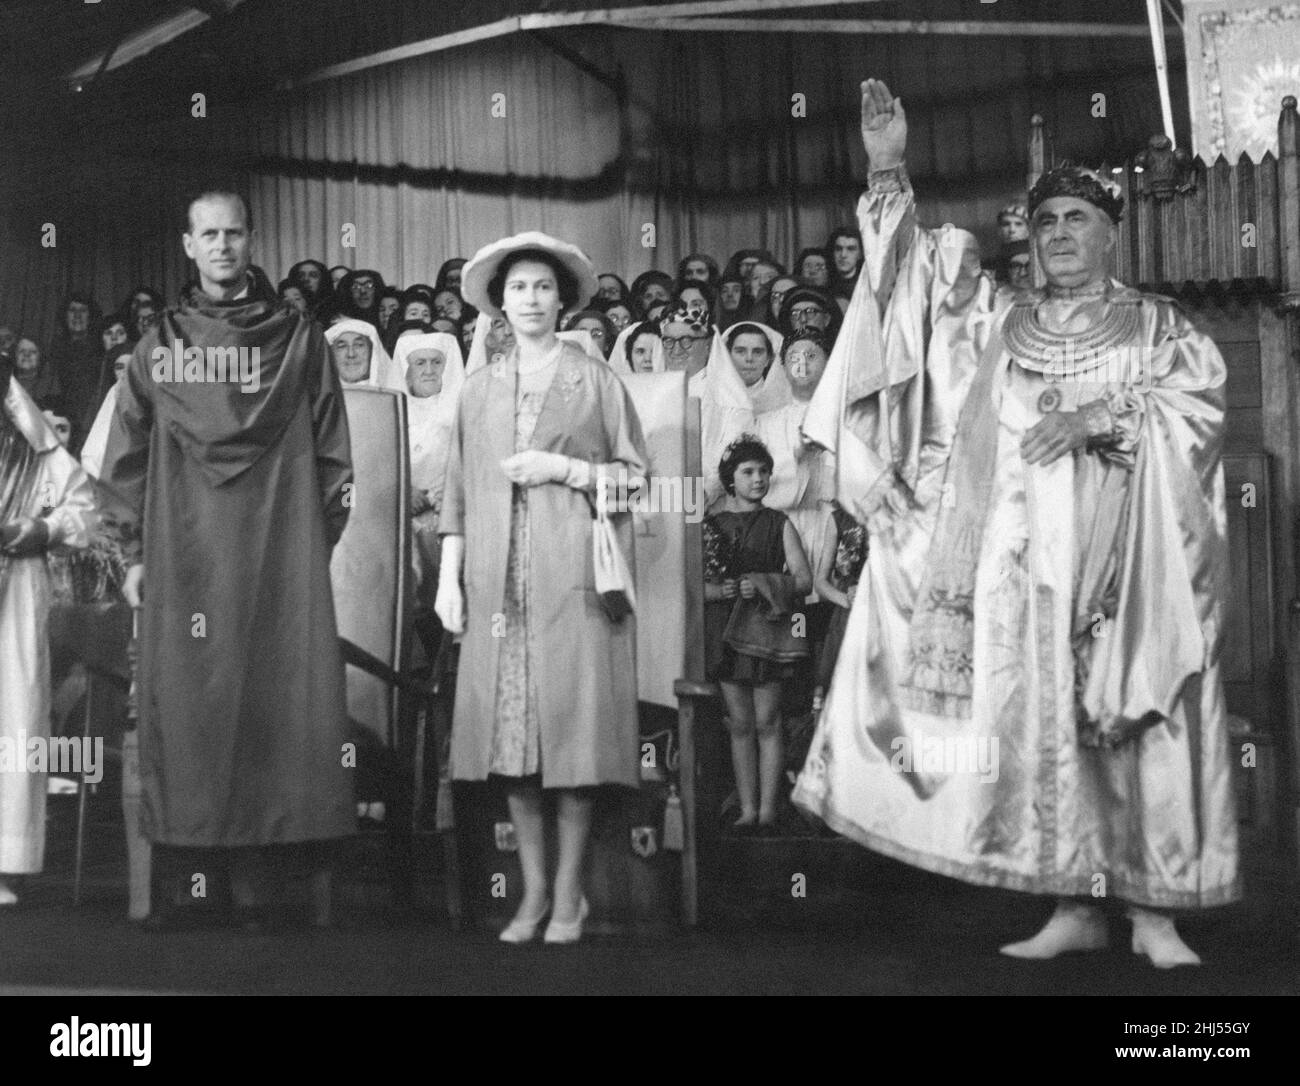 Queen Elizabeth II pictured during two day visit to the welsh capital, Cardiff, Wales, Friday 5th August 1960. Out Picture Shows ... The Queen and Duke of Edinburgh at The National Eisteddfod of Wales, a cultural festival of music, song and poetry. Prince Philip wearing the green robes of a bard, is given his Welsh bardic title Philip Meirionnydd by the Archdruid Trefin of Wales, Edgar Phillips (right). Stock Photo